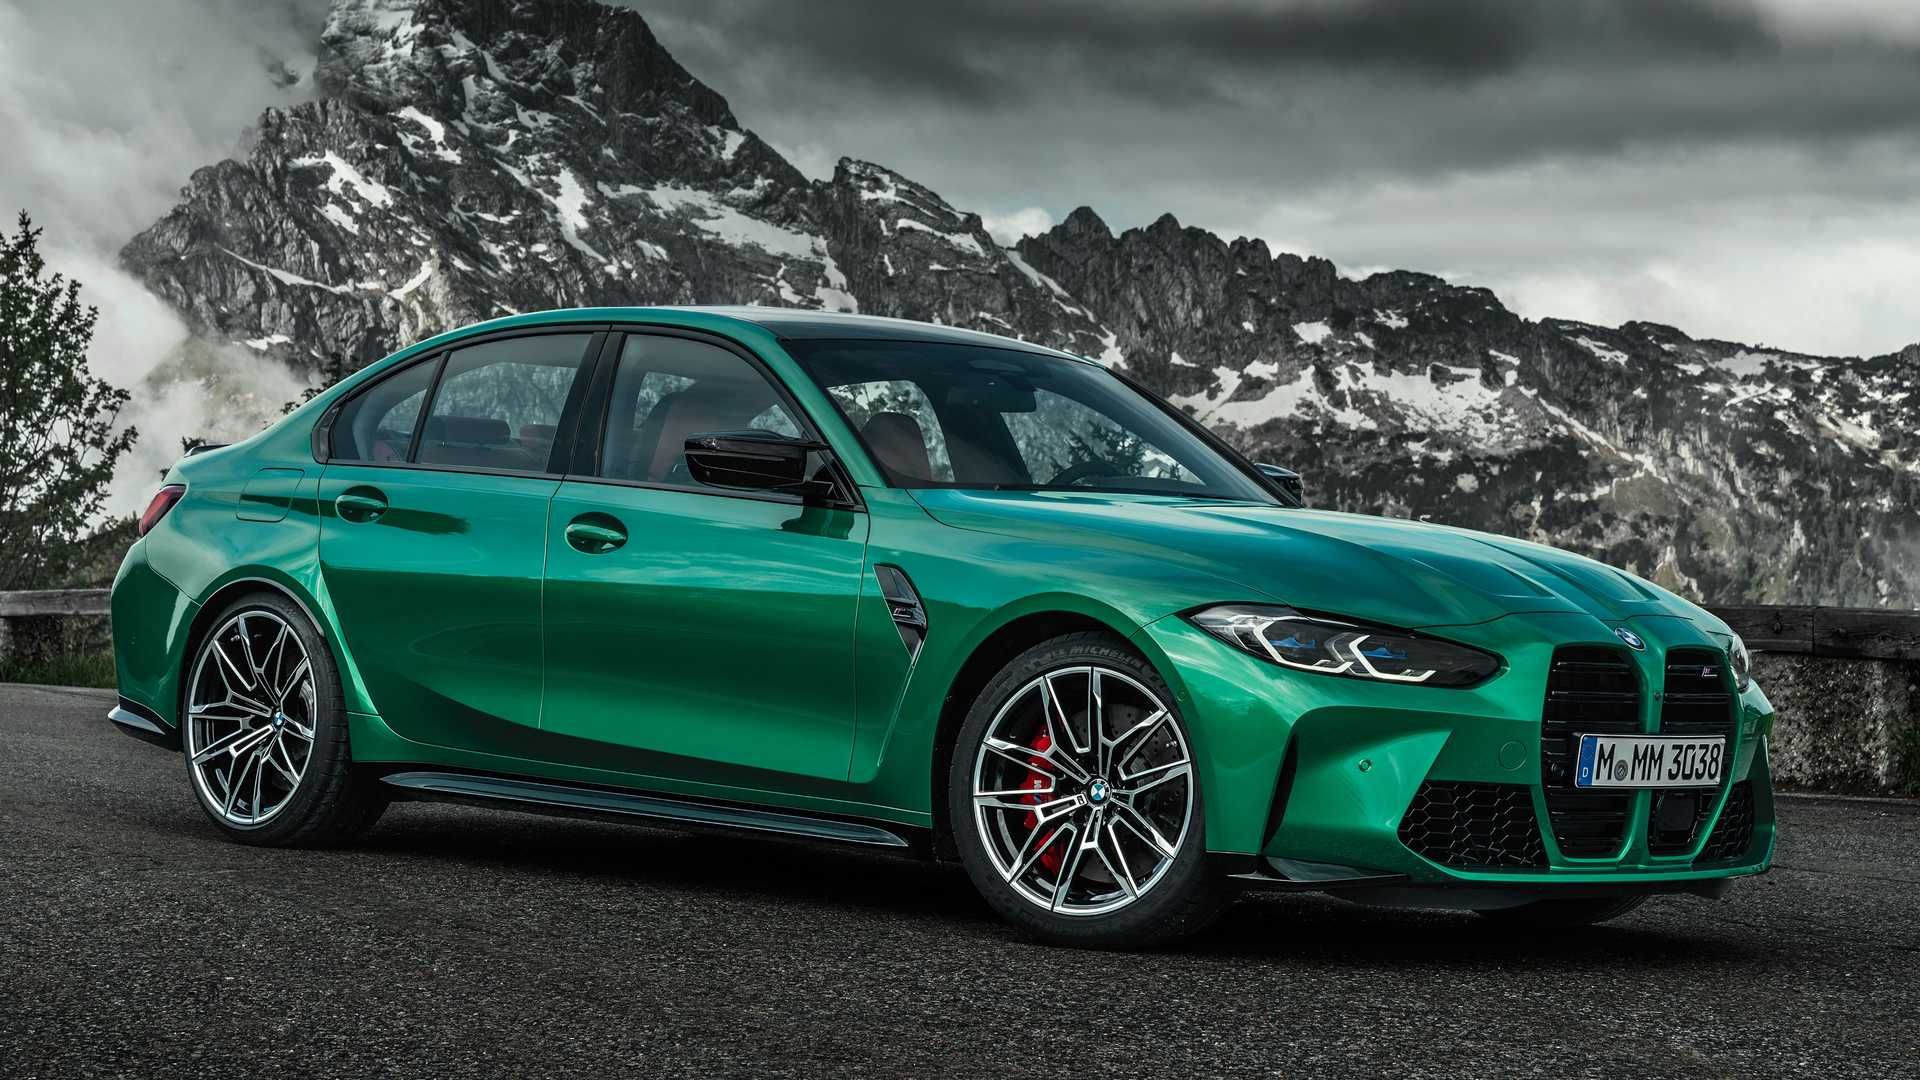 2021 BMW M3 parked outside